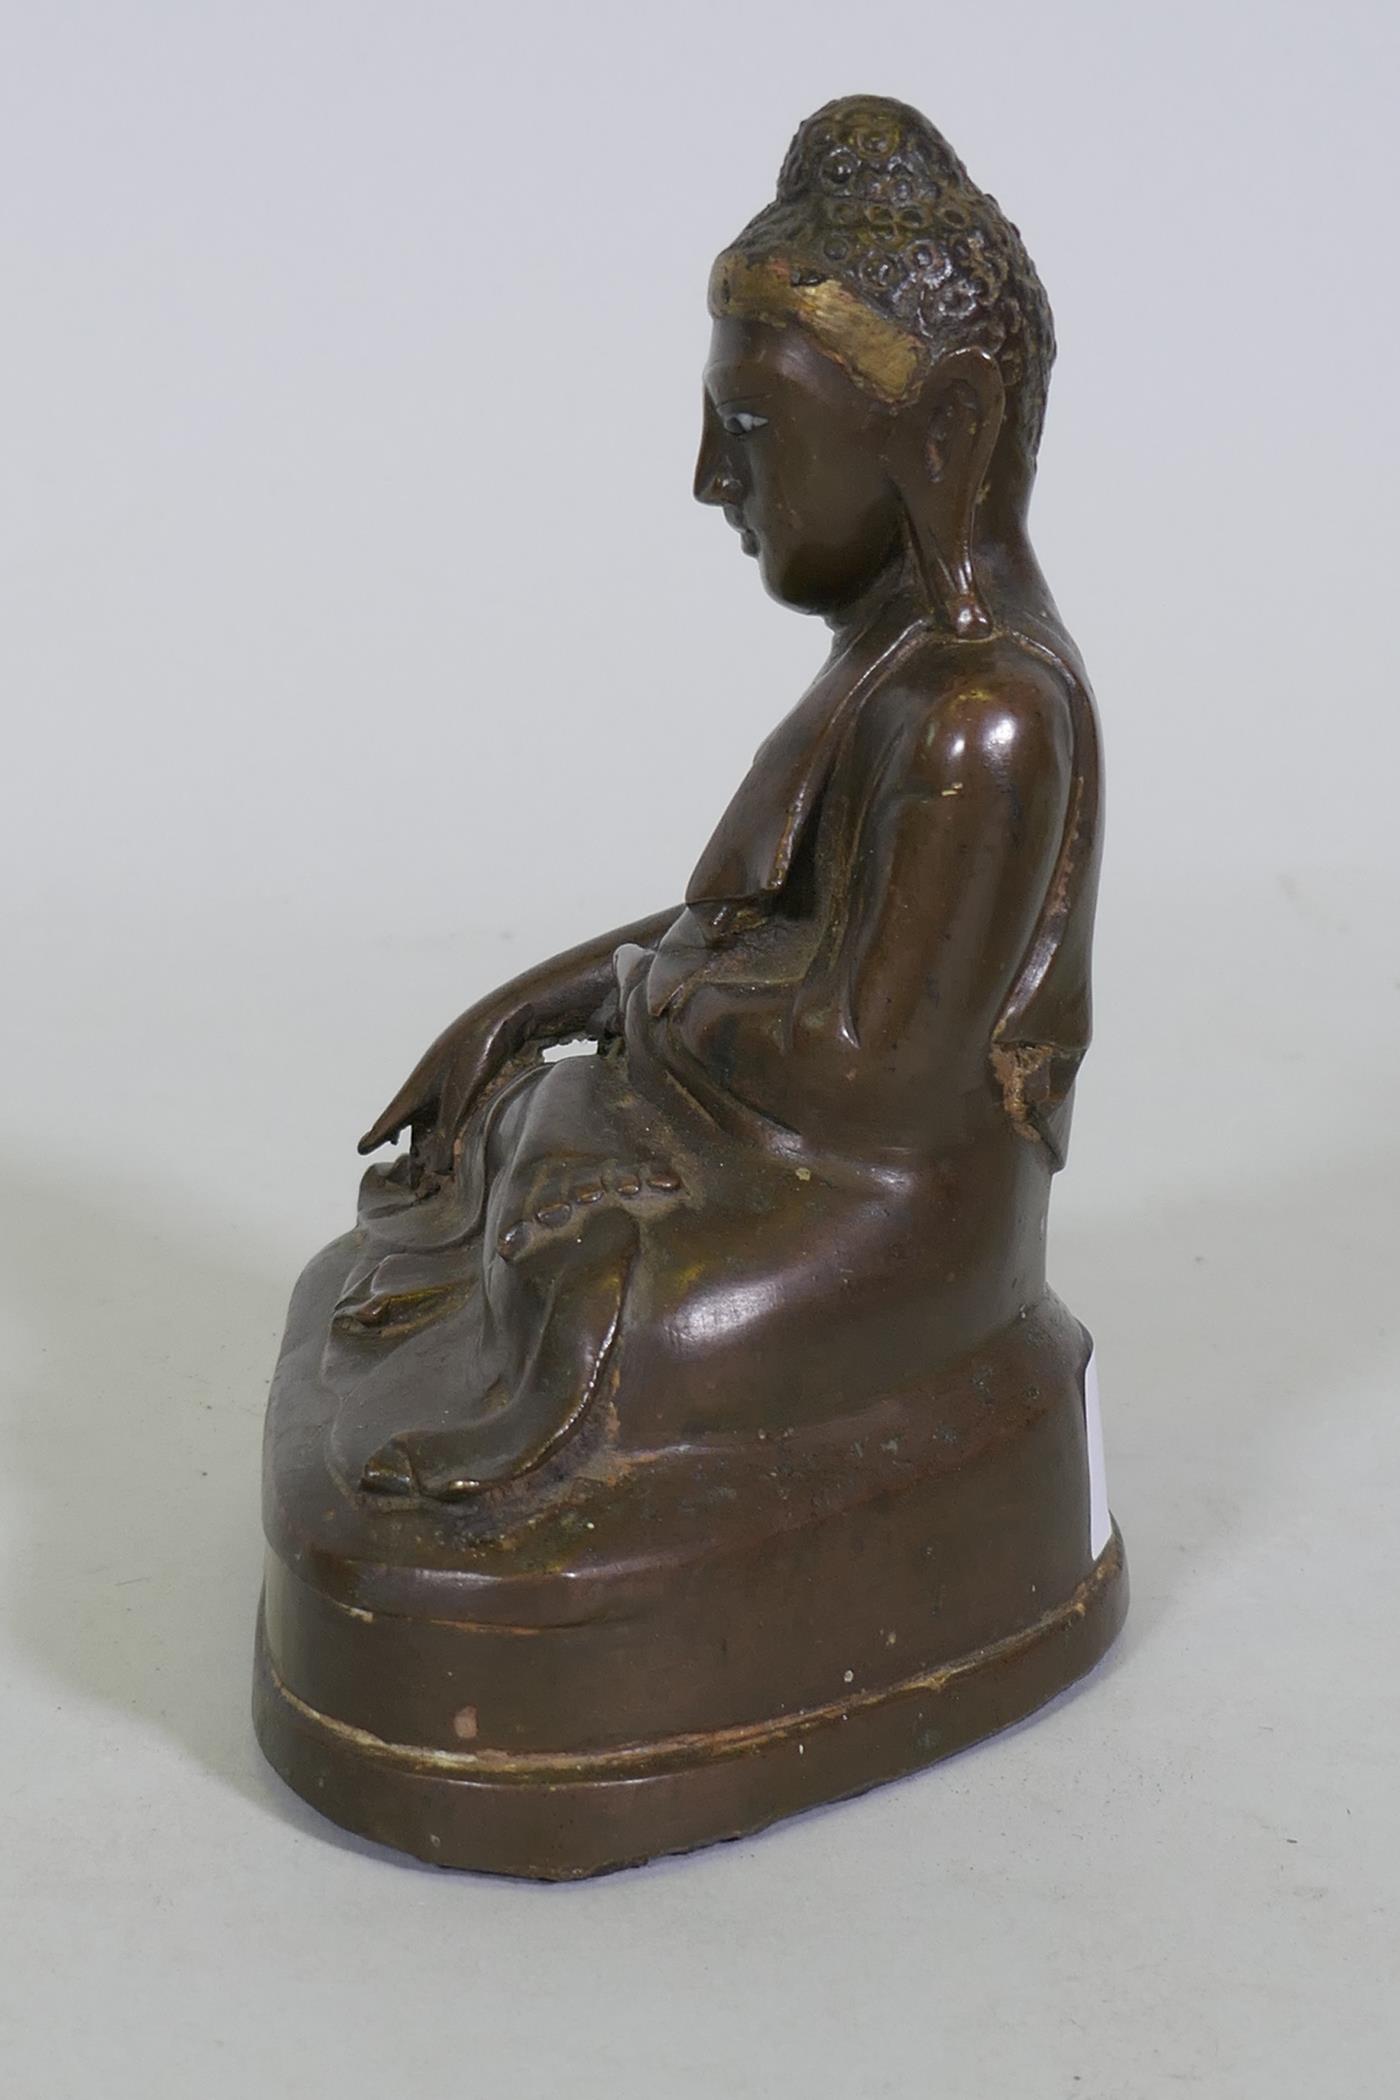 Oriental bronze Buddha with inset glass eyes, possibly Burmese, 17cm high - Image 4 of 7